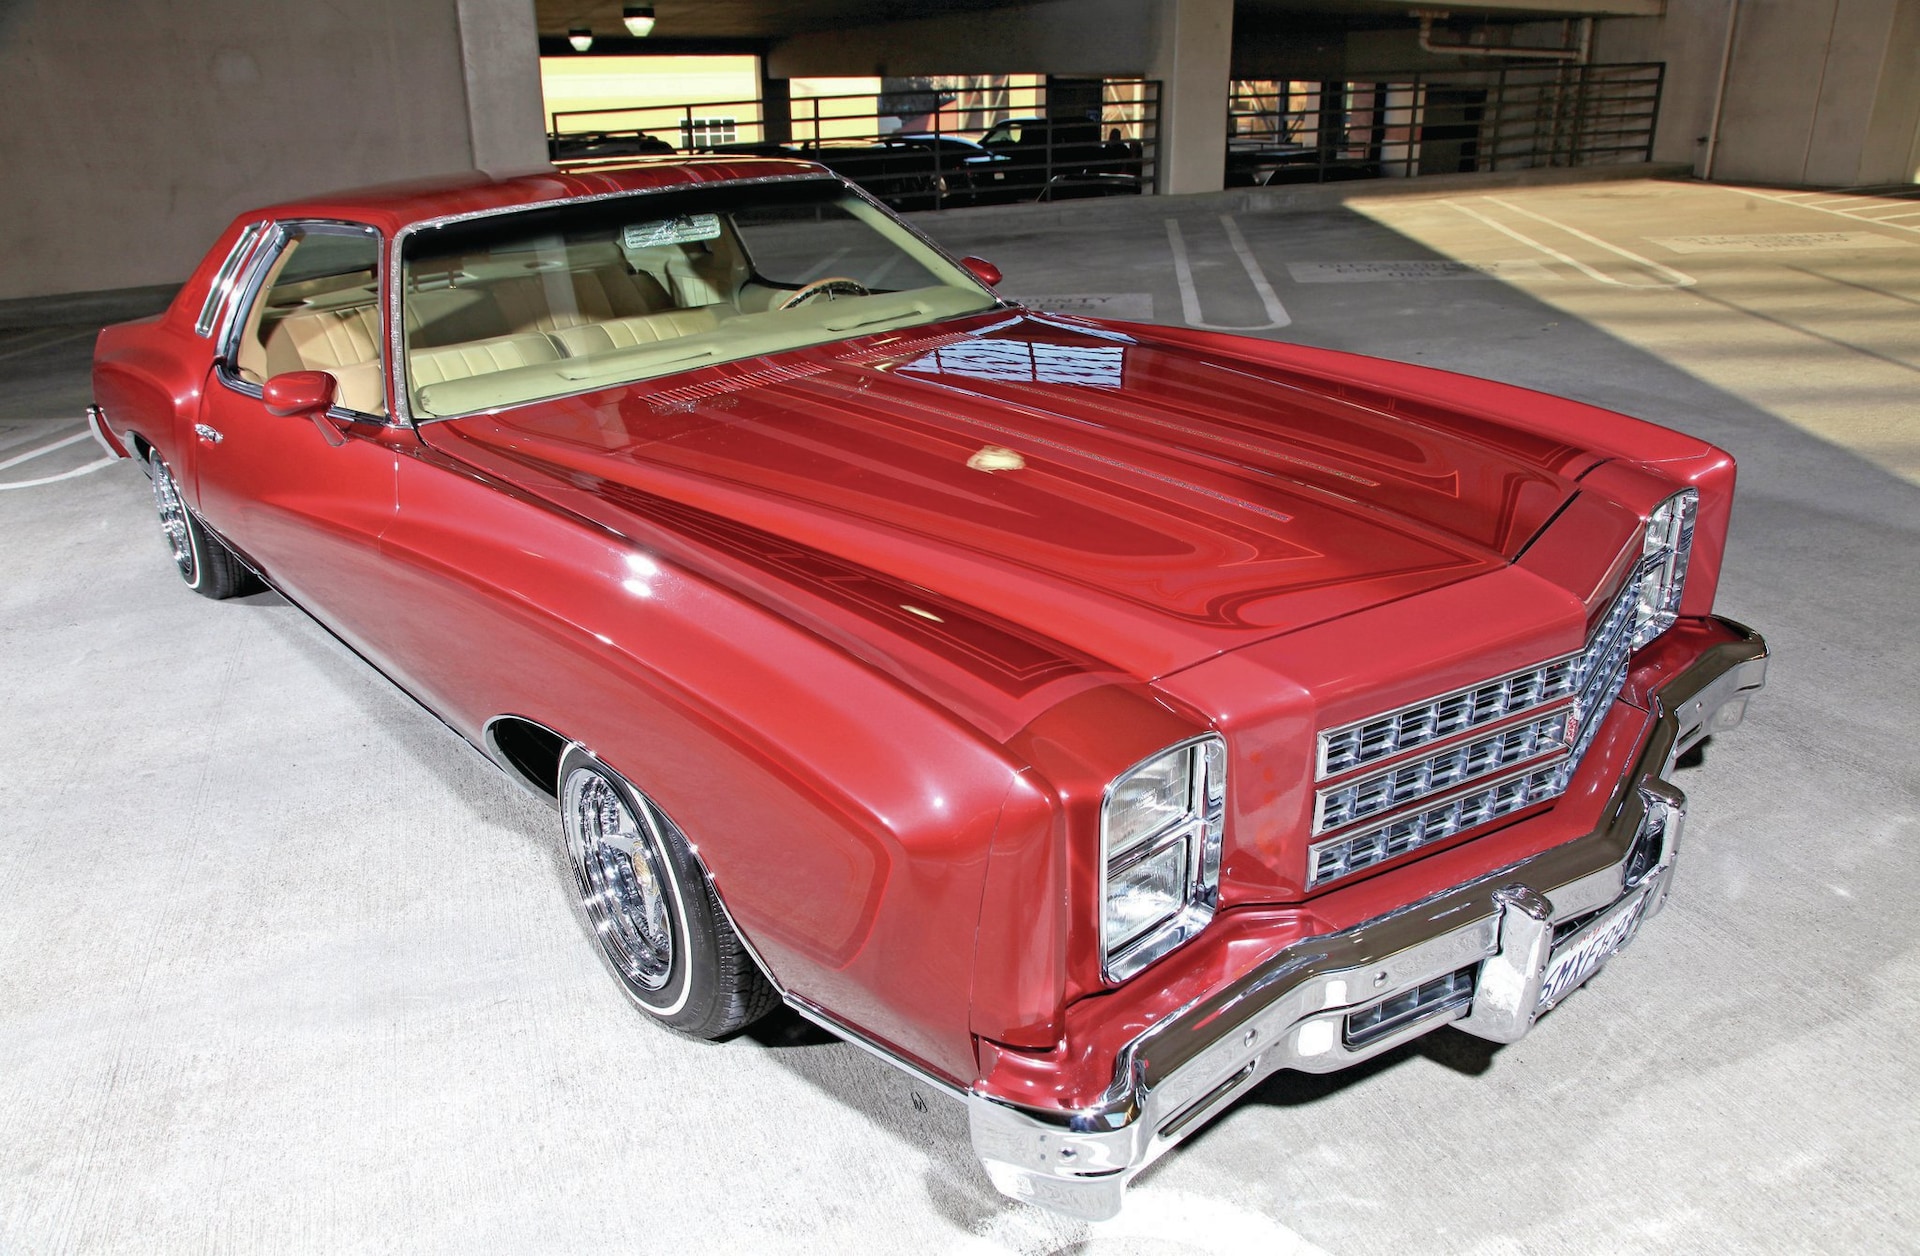 1976 Chevrolet Monte Carlo - A General Motors Family Tradition